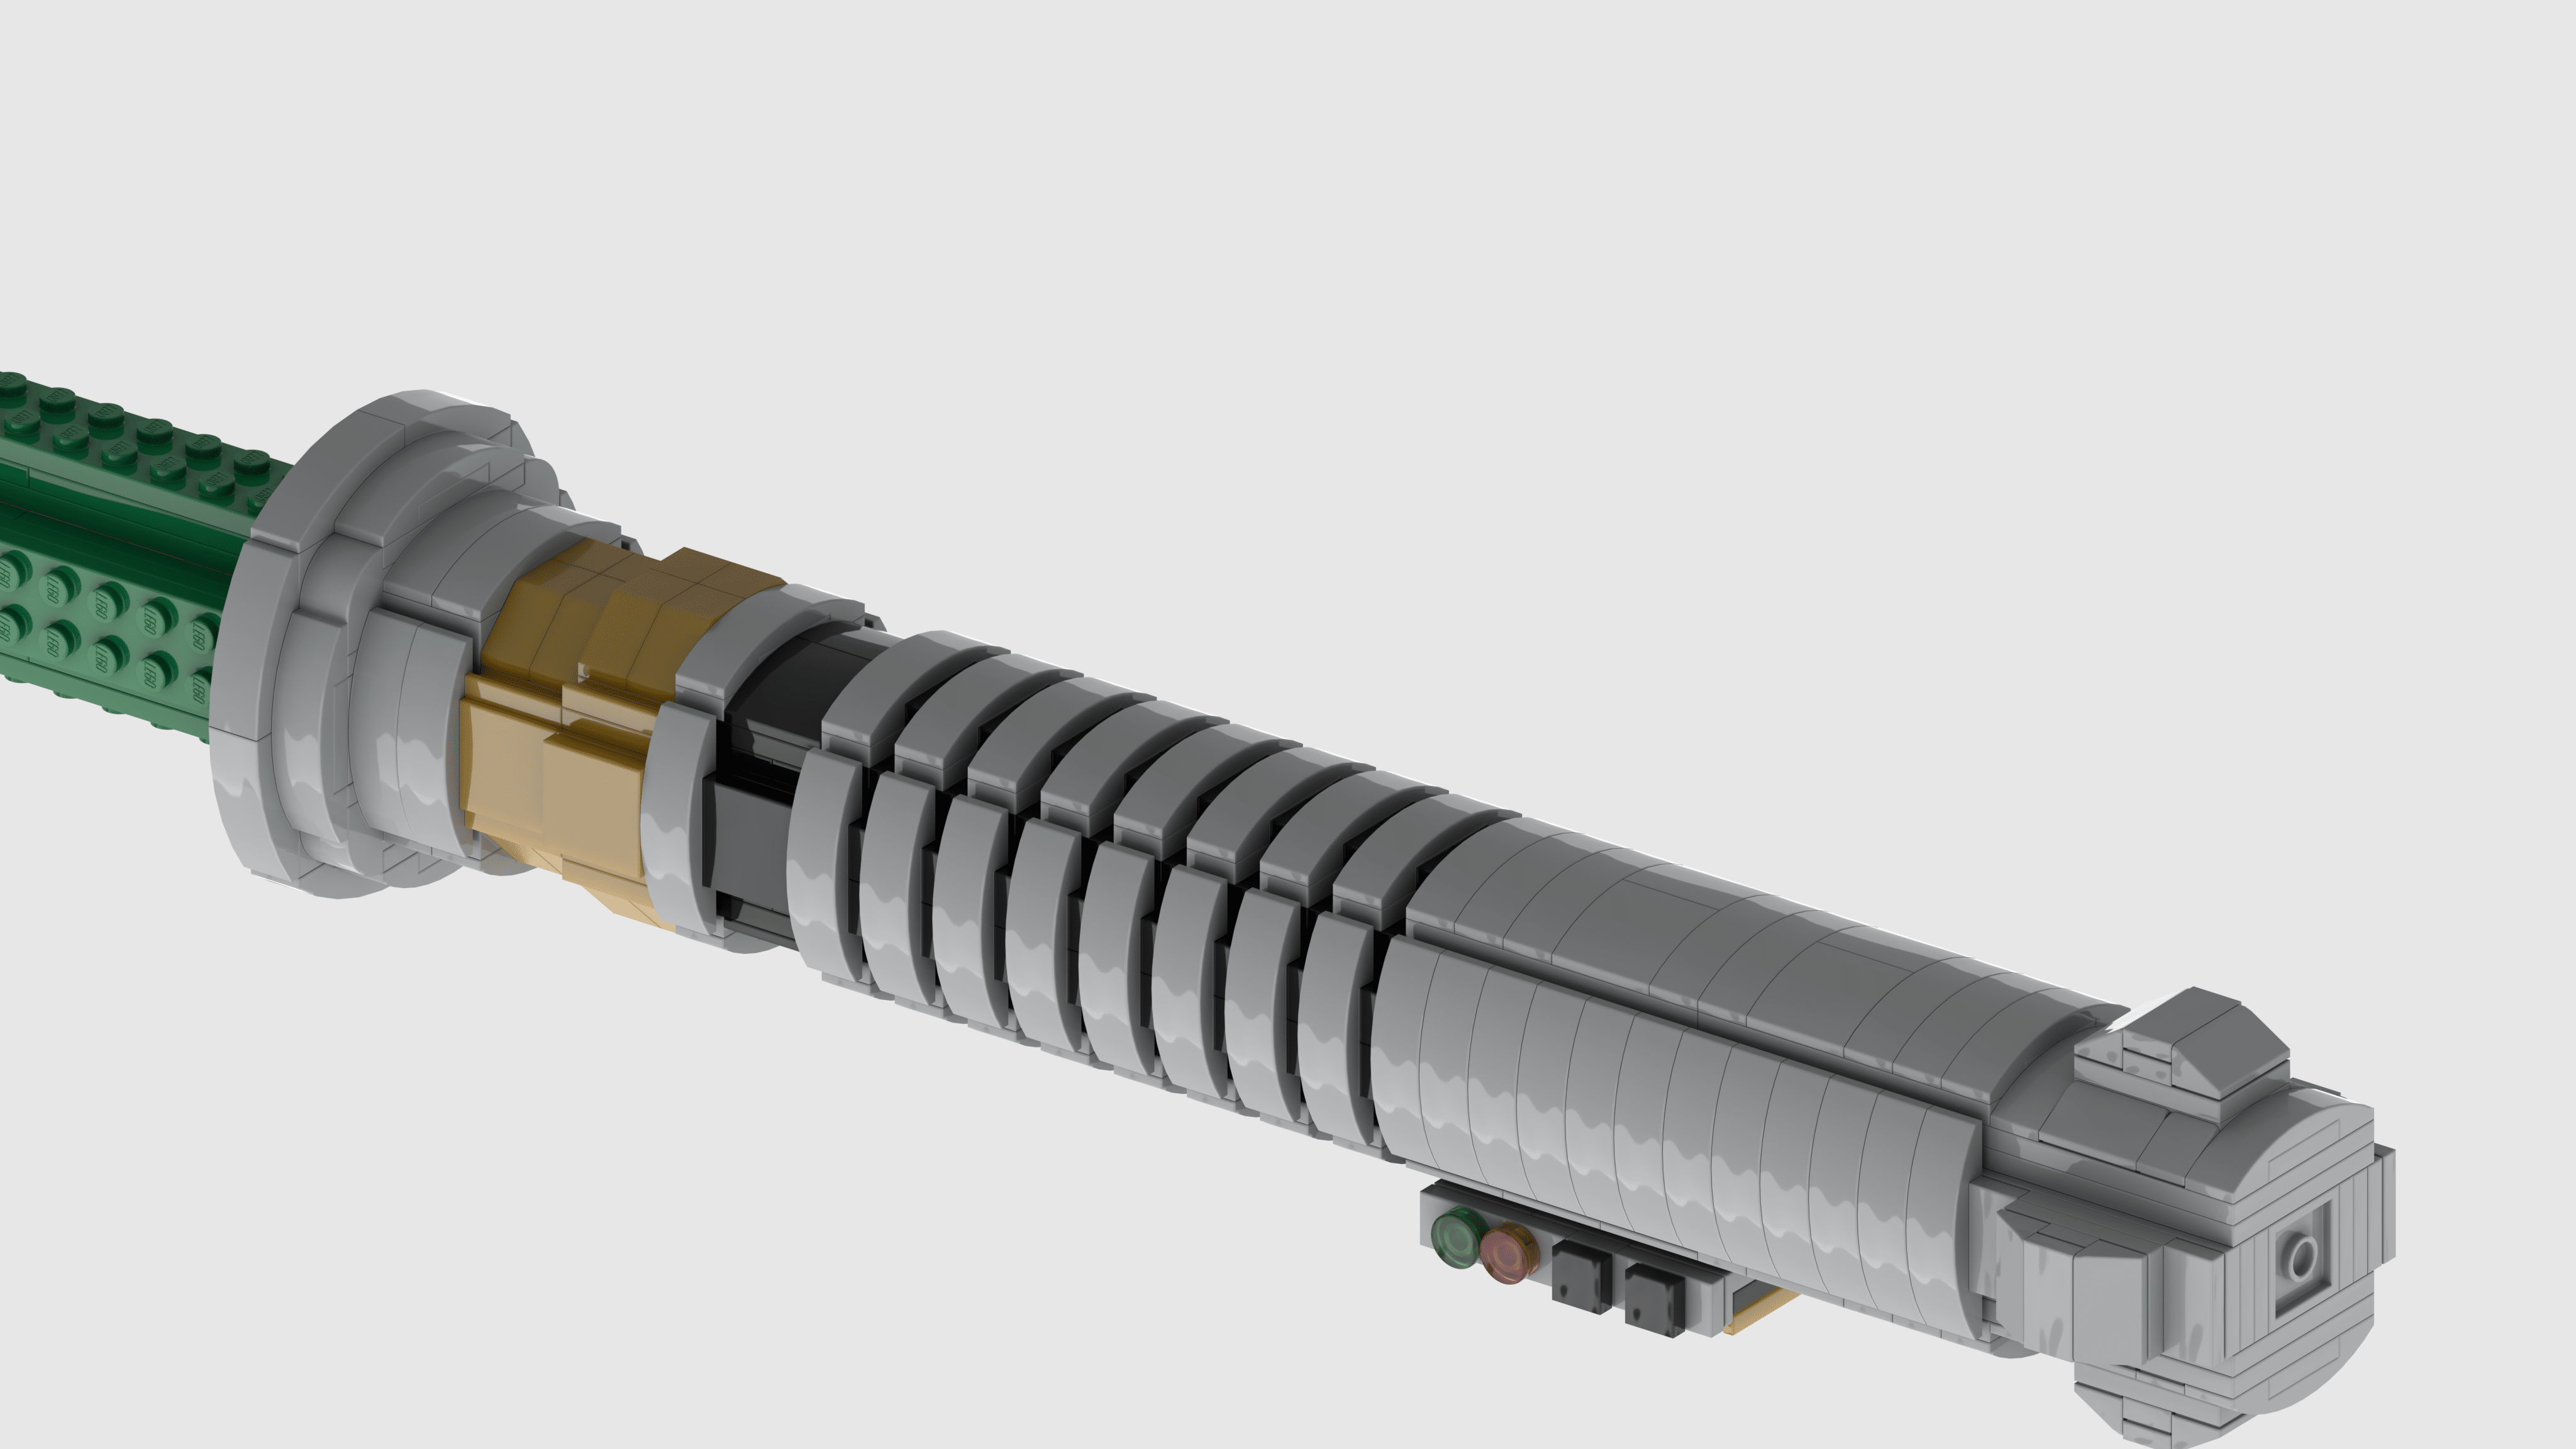 LEGO MOC Qui-Gon Jinn's Lightsaber with Full Length Blade by BuiltByOdoe